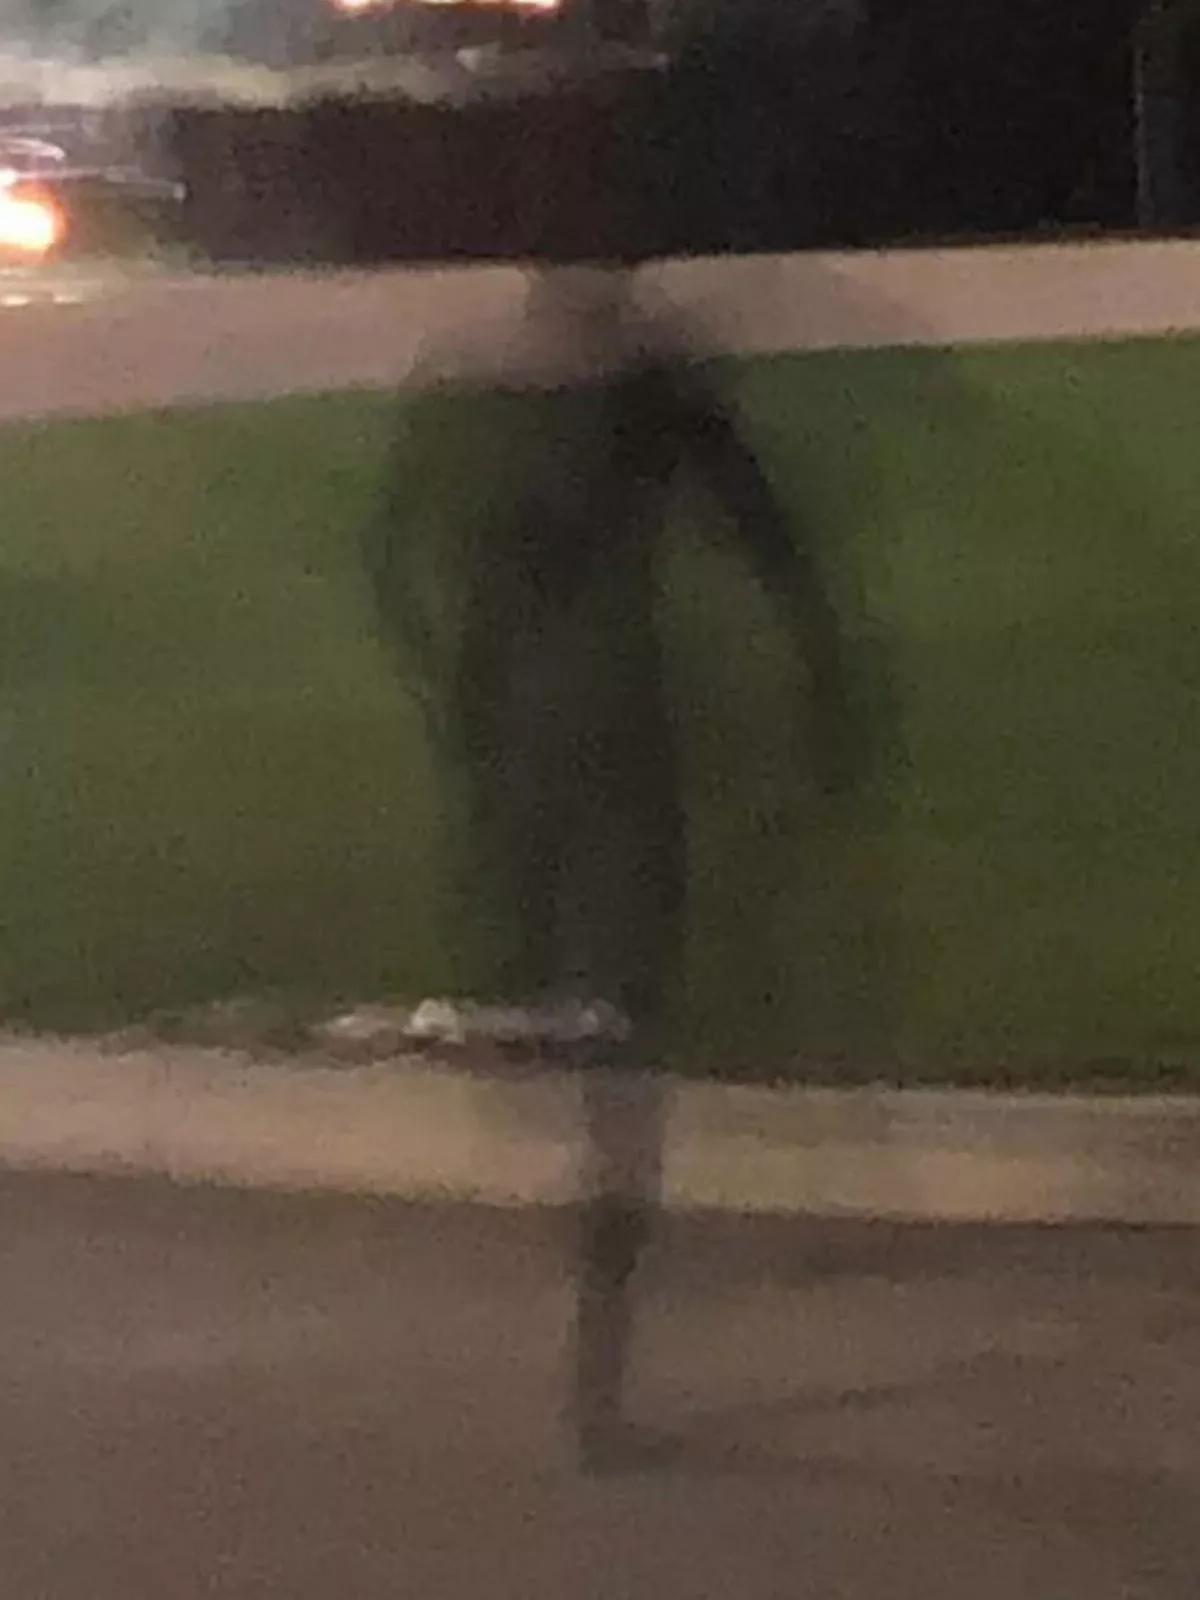 Alleged 'scrawny and menacing gimp' sighting in quiet UK village sparks fear among children (2)